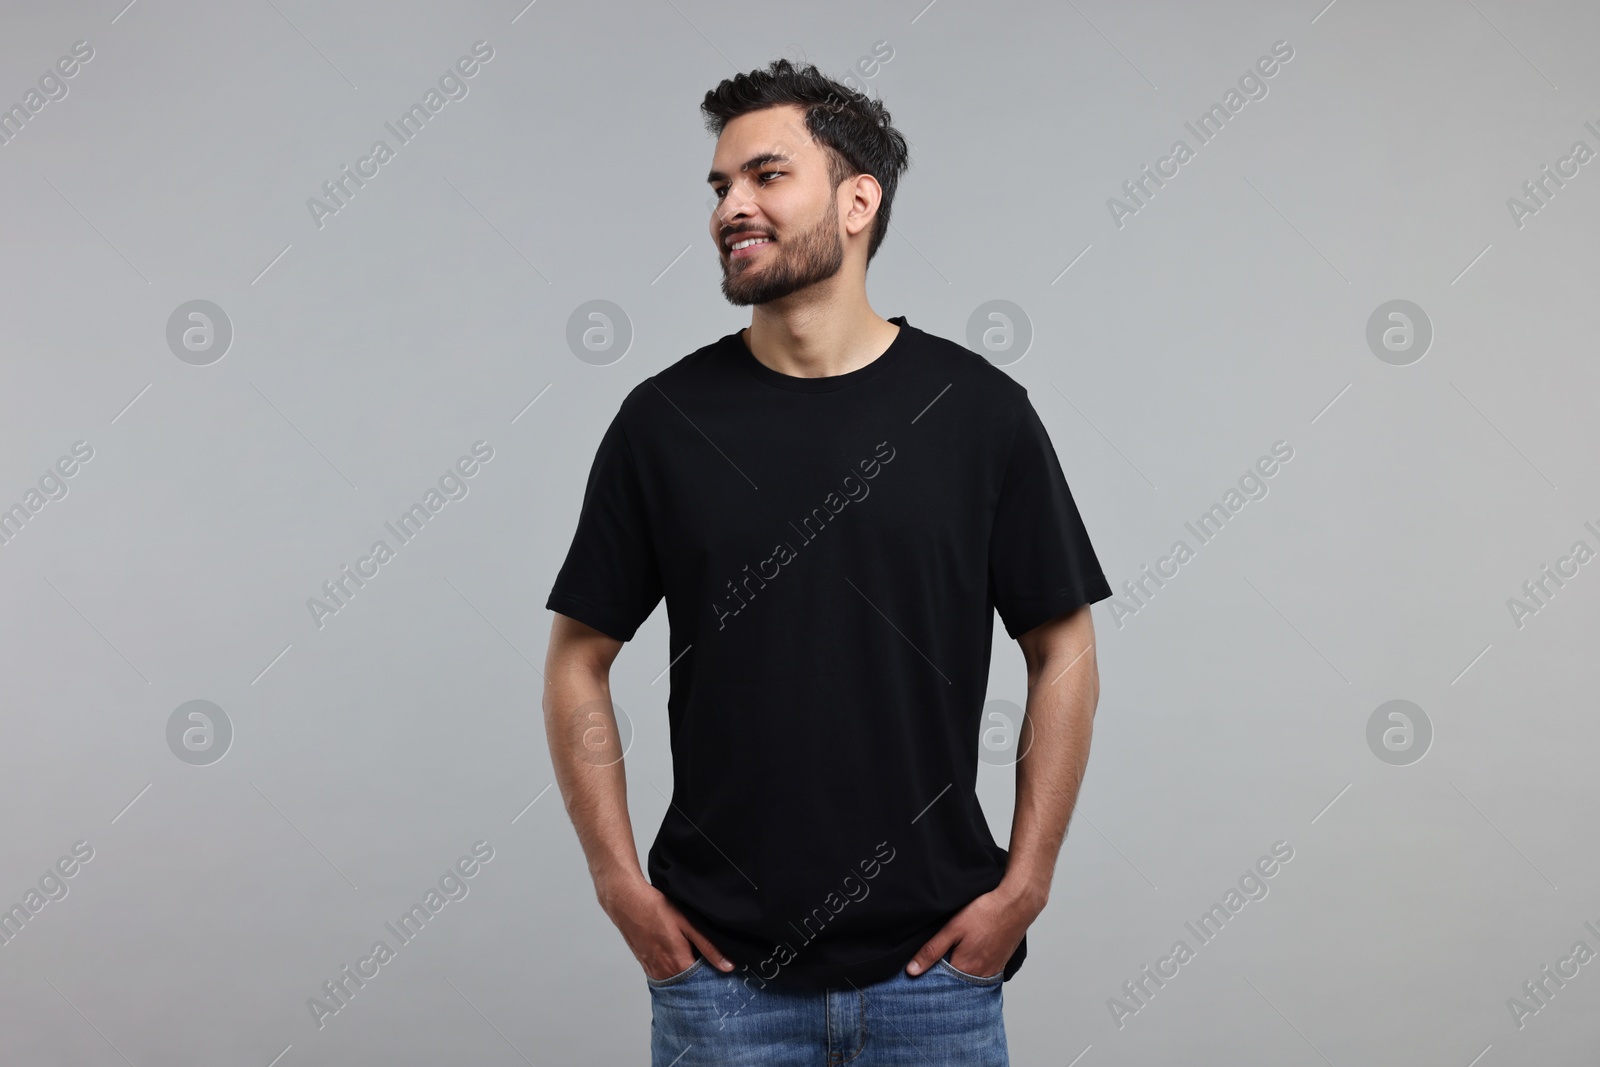 Photo of Smiling man in black t-shirt on grey background